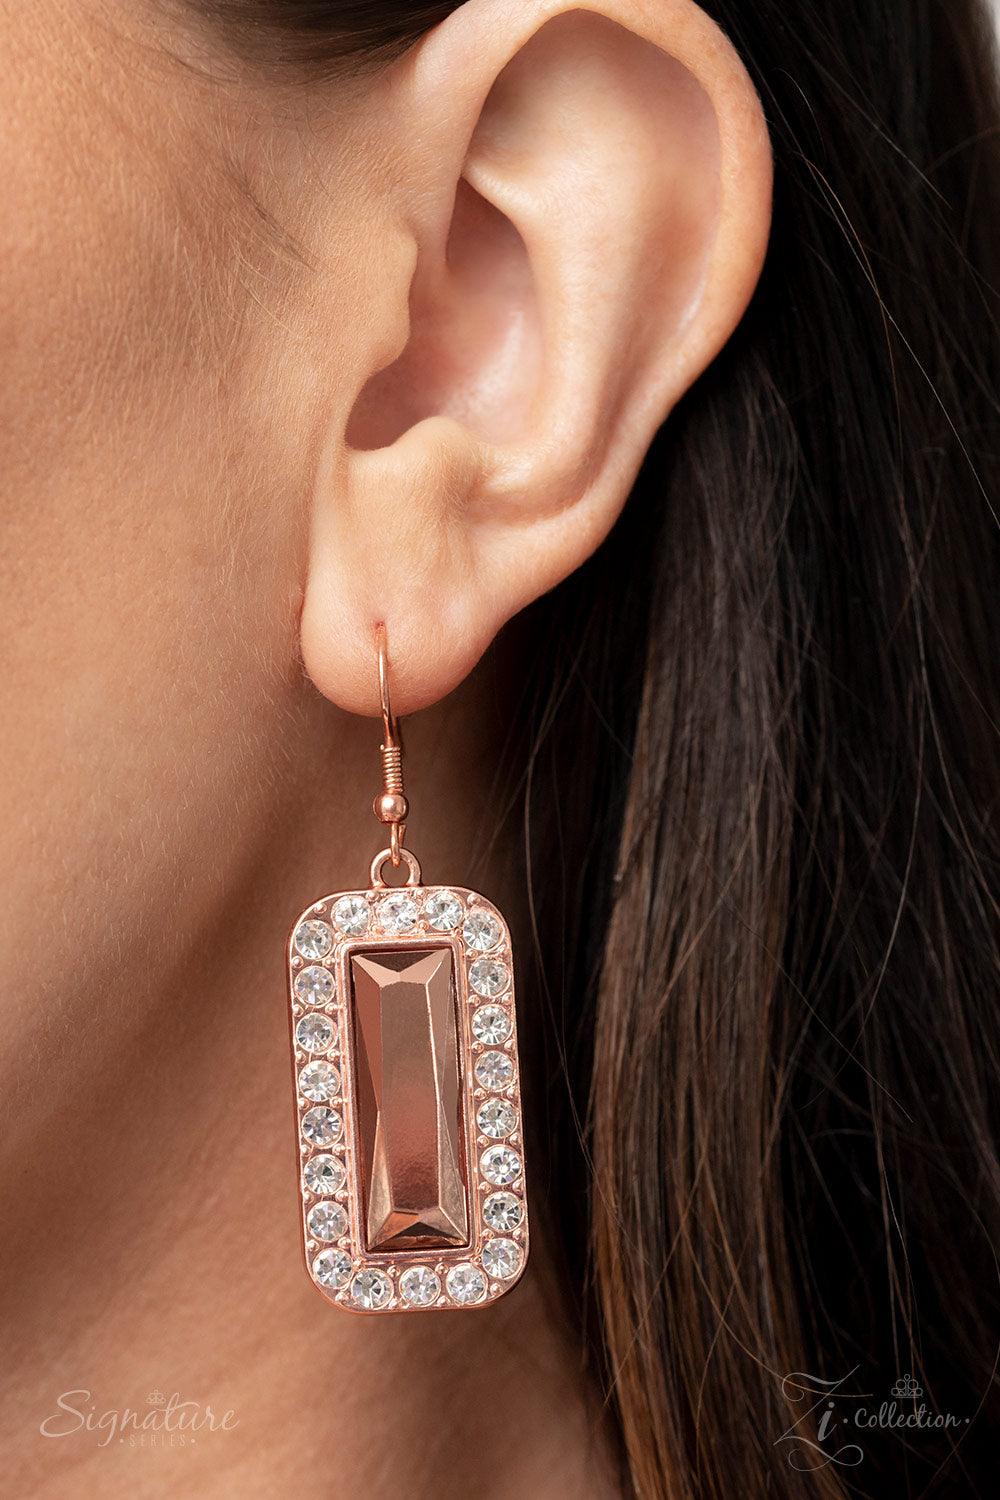 Paparazzi Accessories The Deborah An infinite display of iridescent bars, shiny copper bars with a metallic and reflective finish, white rhinestones, rhinestones with peach-colored undertones, and shiny copper bars studded with dazzling white rhinestones